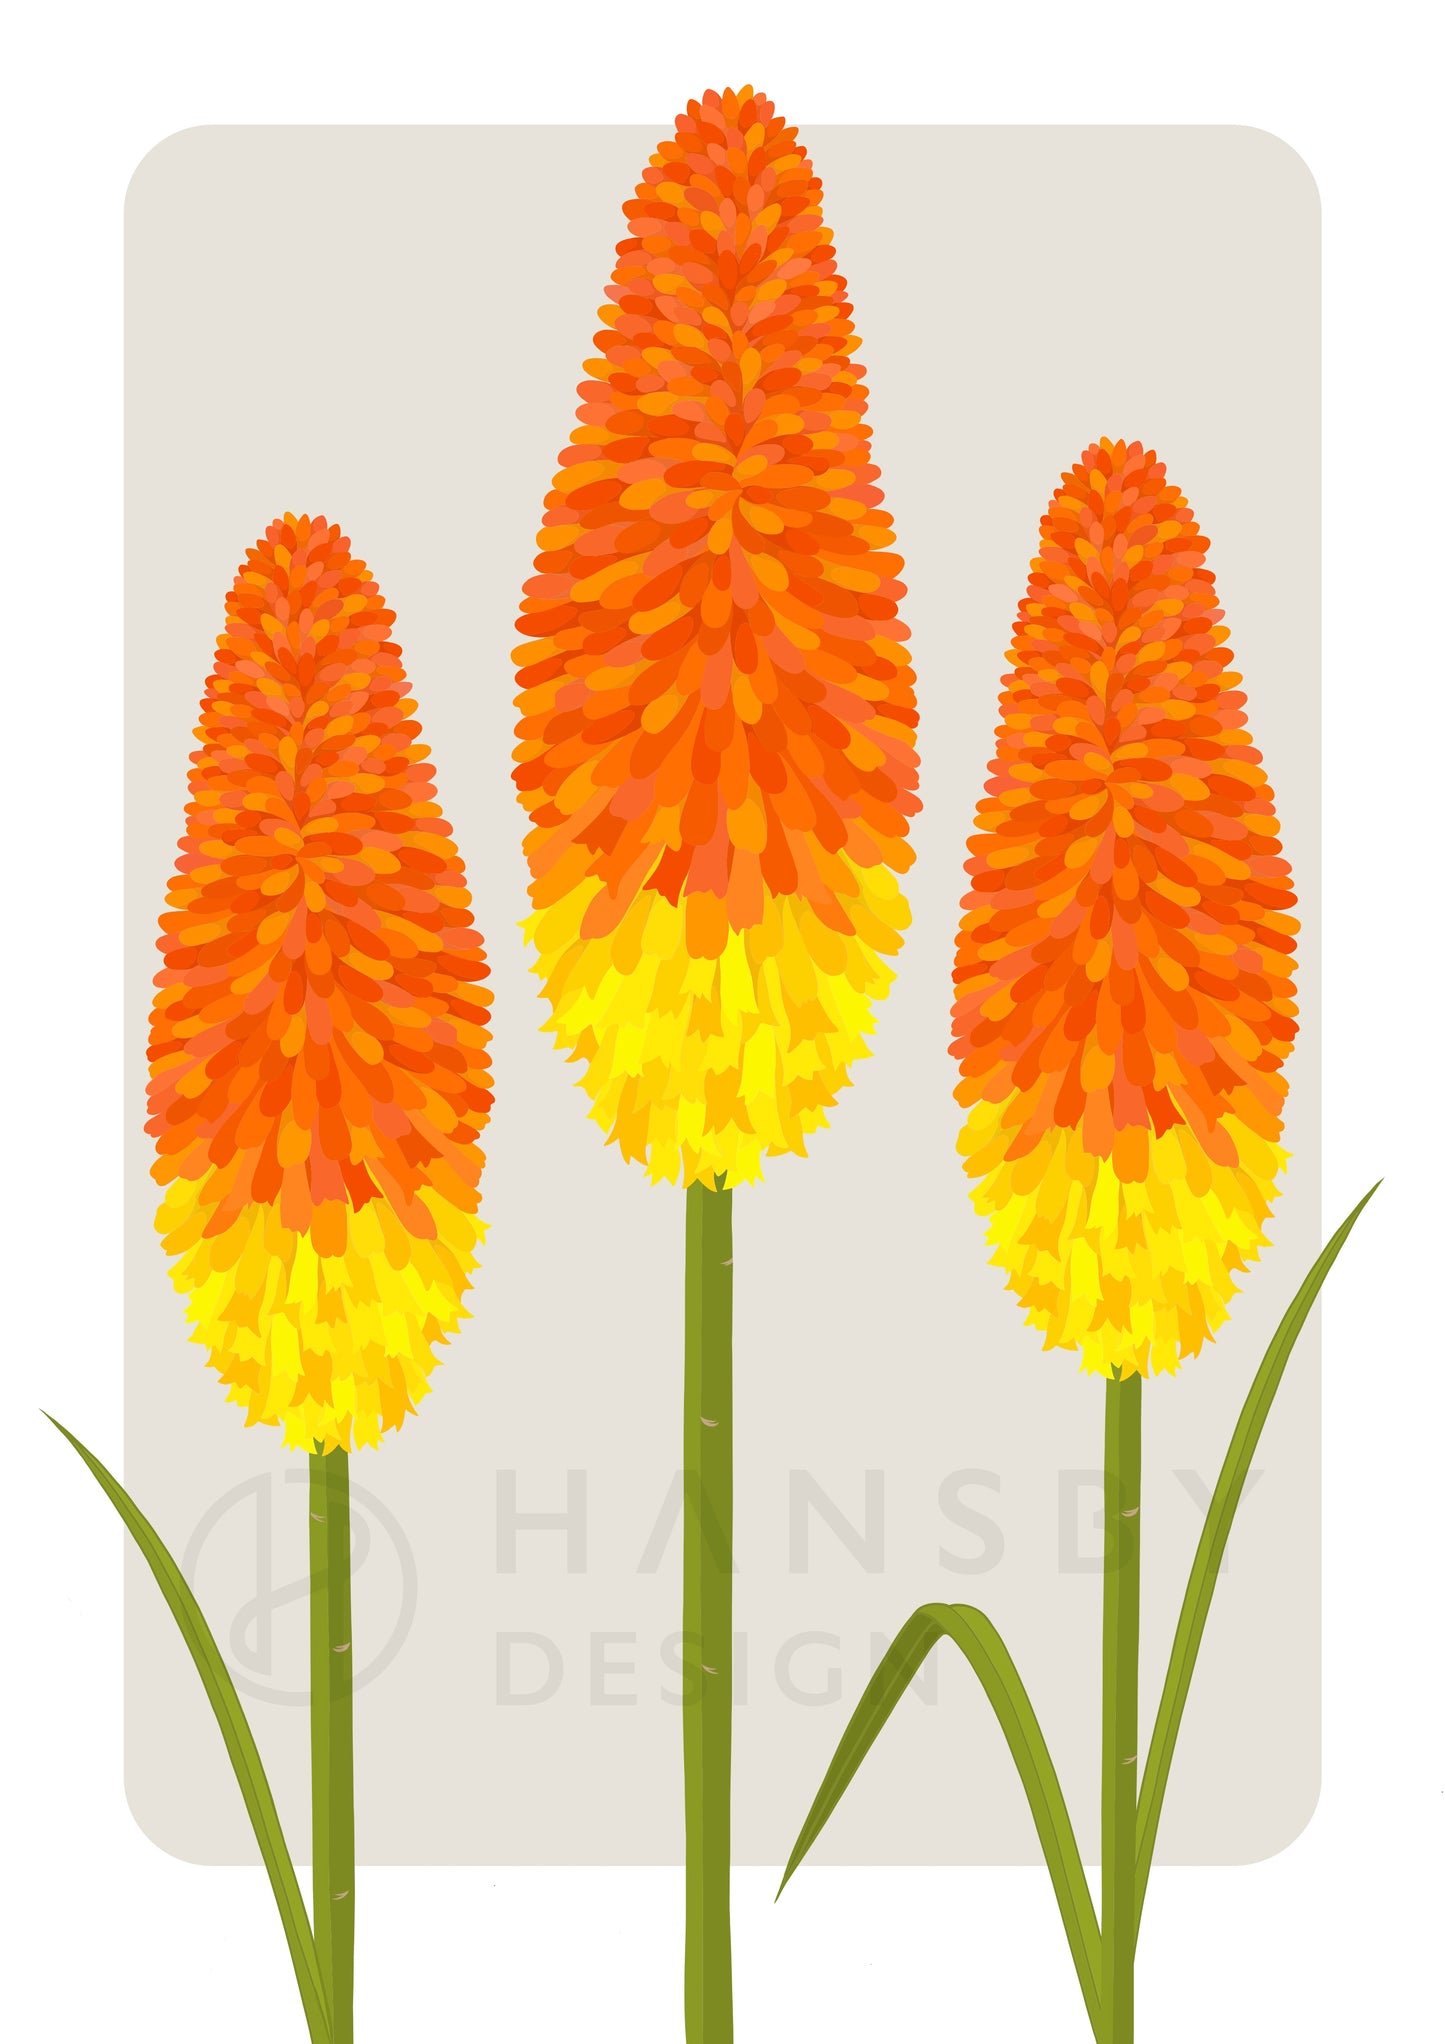 Red Hot Poker art print by New Zealand artist Hansby Design